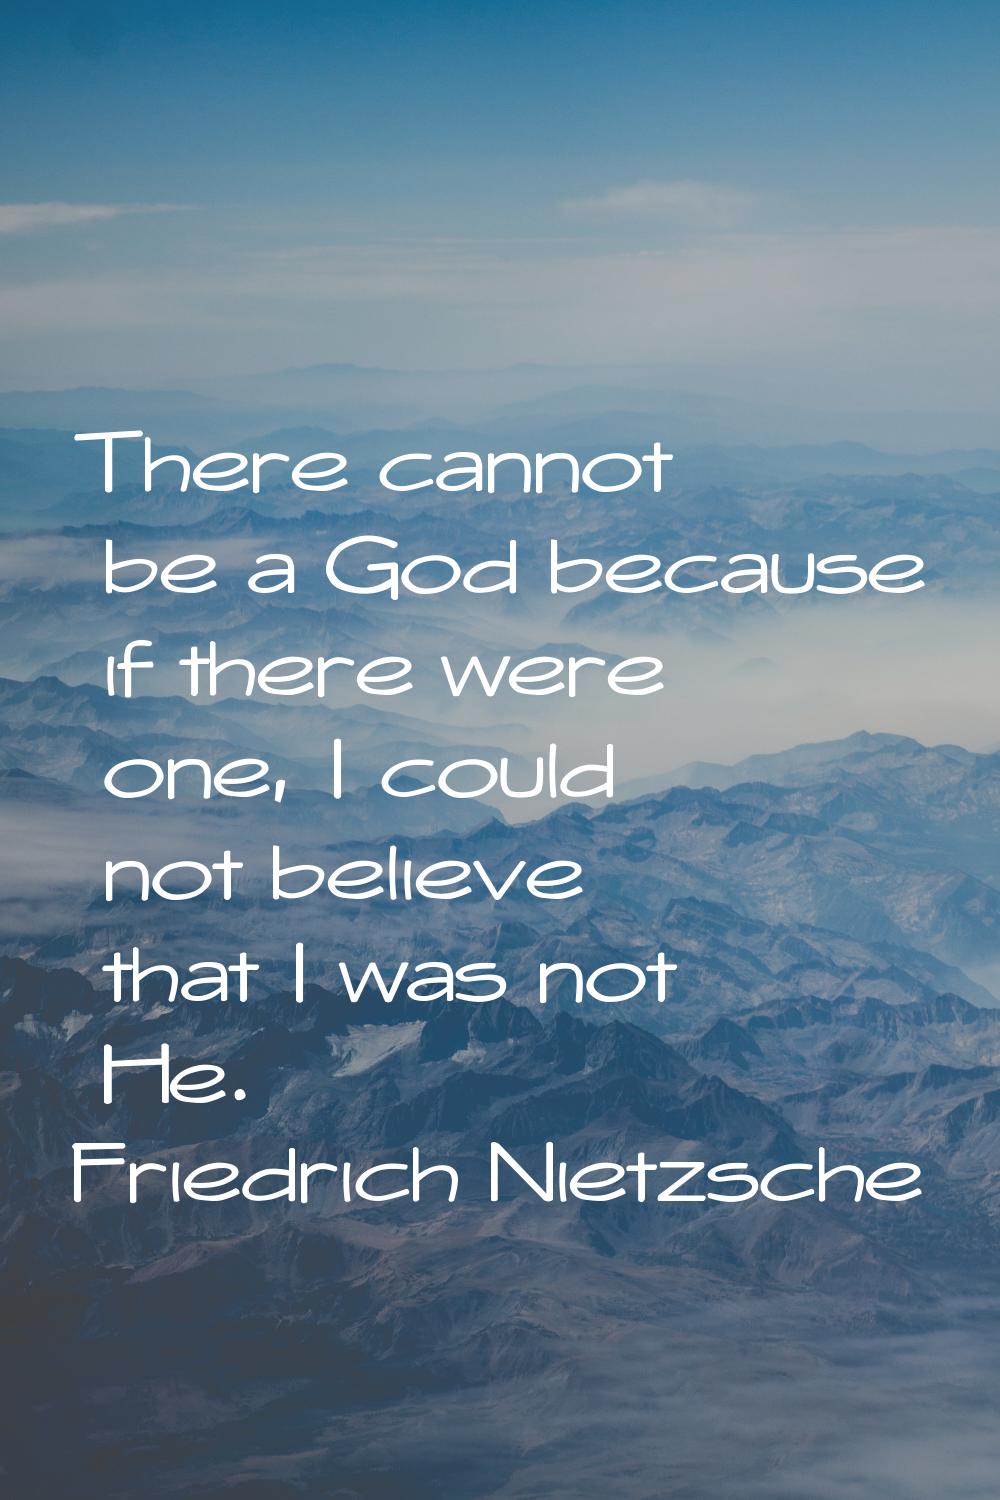 There cannot be a God because if there were one, I could not believe that I was not He.